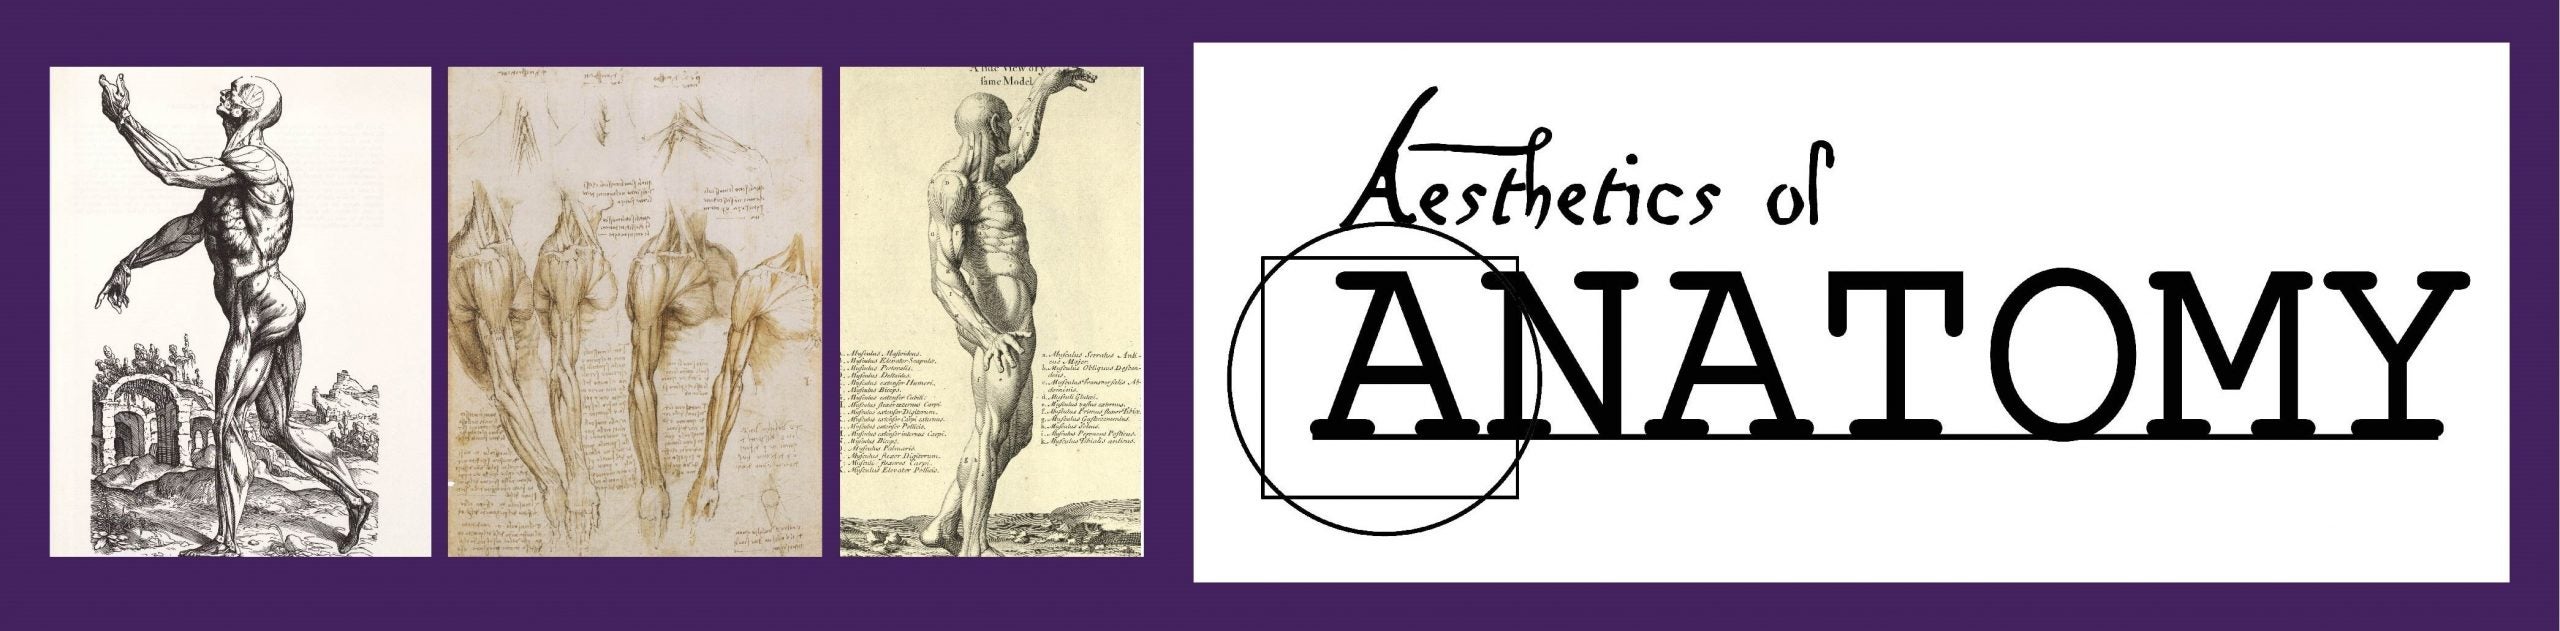 Aesthetics of Anatomy logo with 3 anatomy drawings to the left.